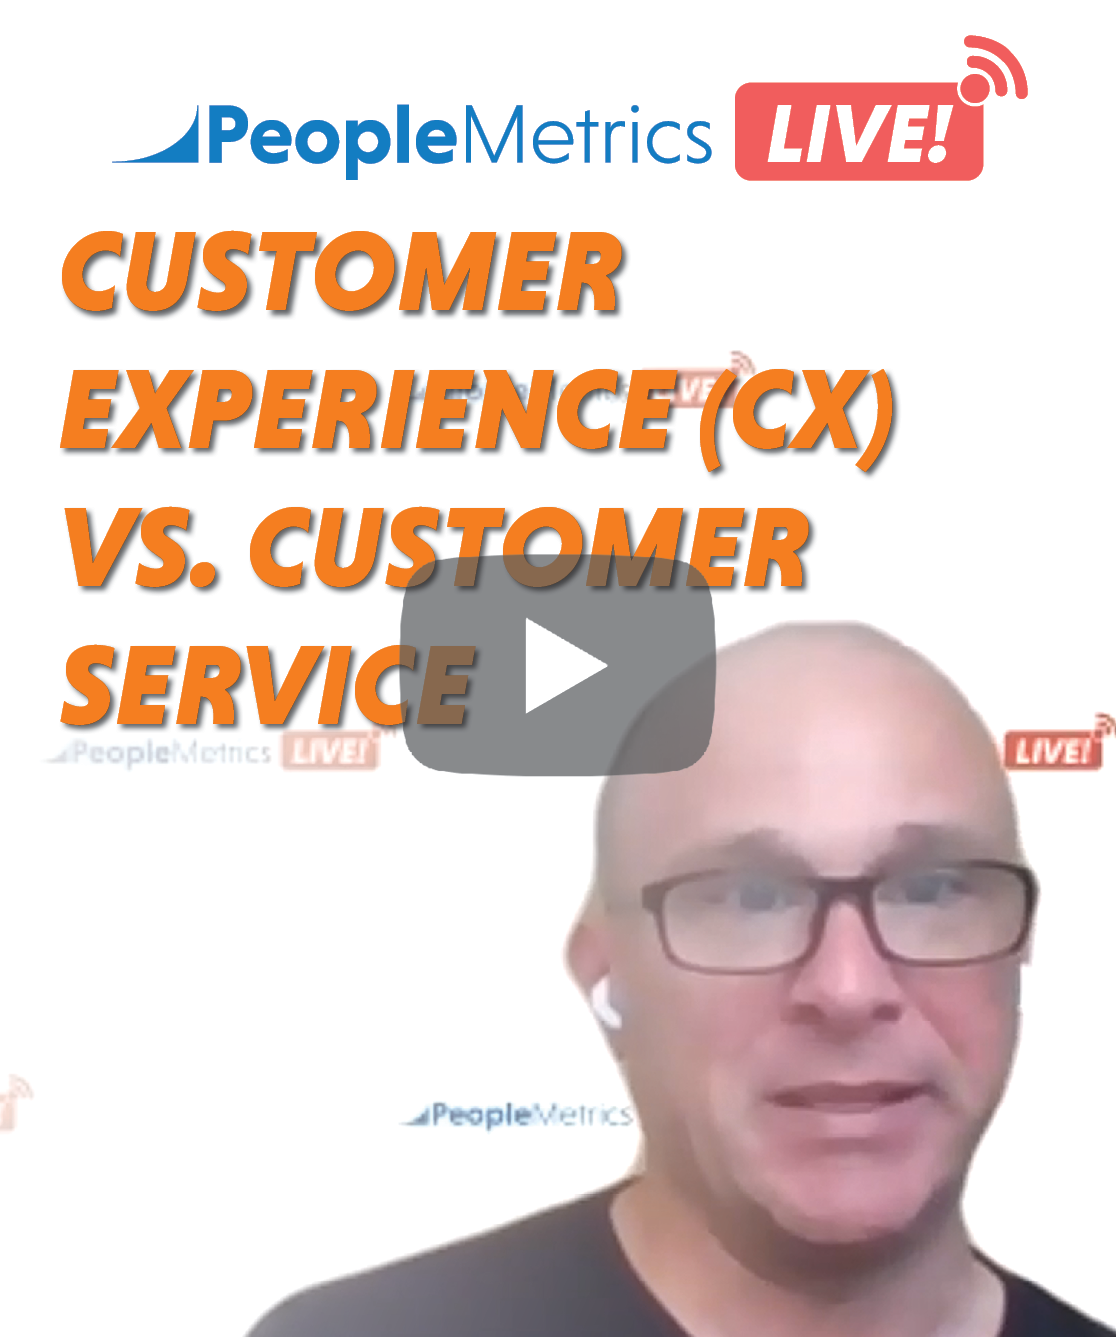 WATCH NOW: What’s the Difference Between Customer Experience (CX) and Customer Service? | PeopleMetrics LIVE!